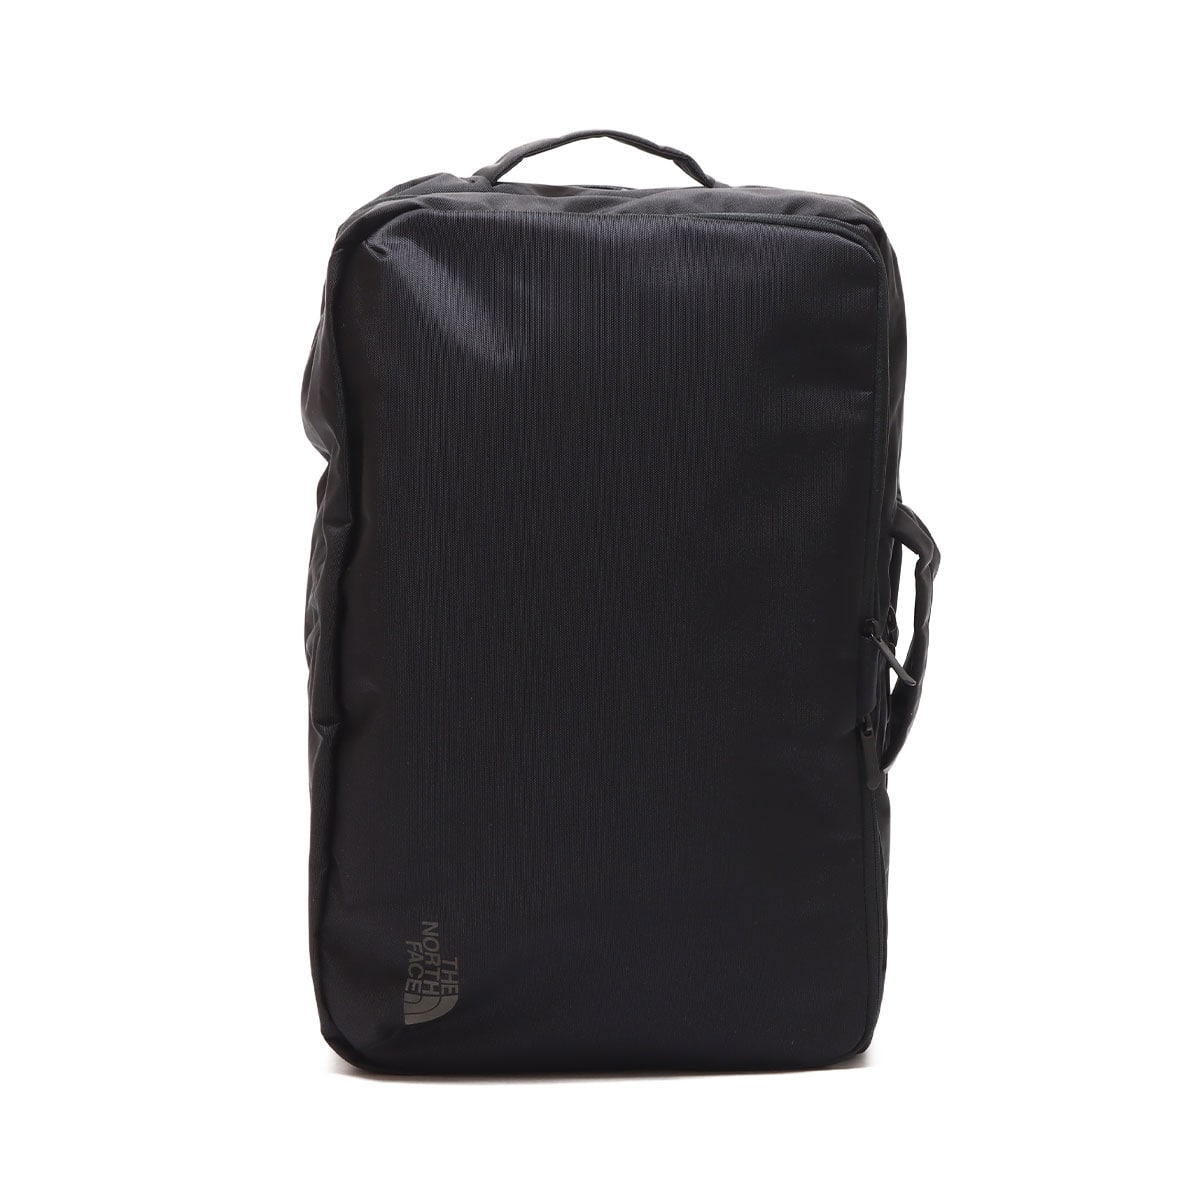 THE NORTH FACE SHUTTLE DUFFEL BLACK 23SS-I